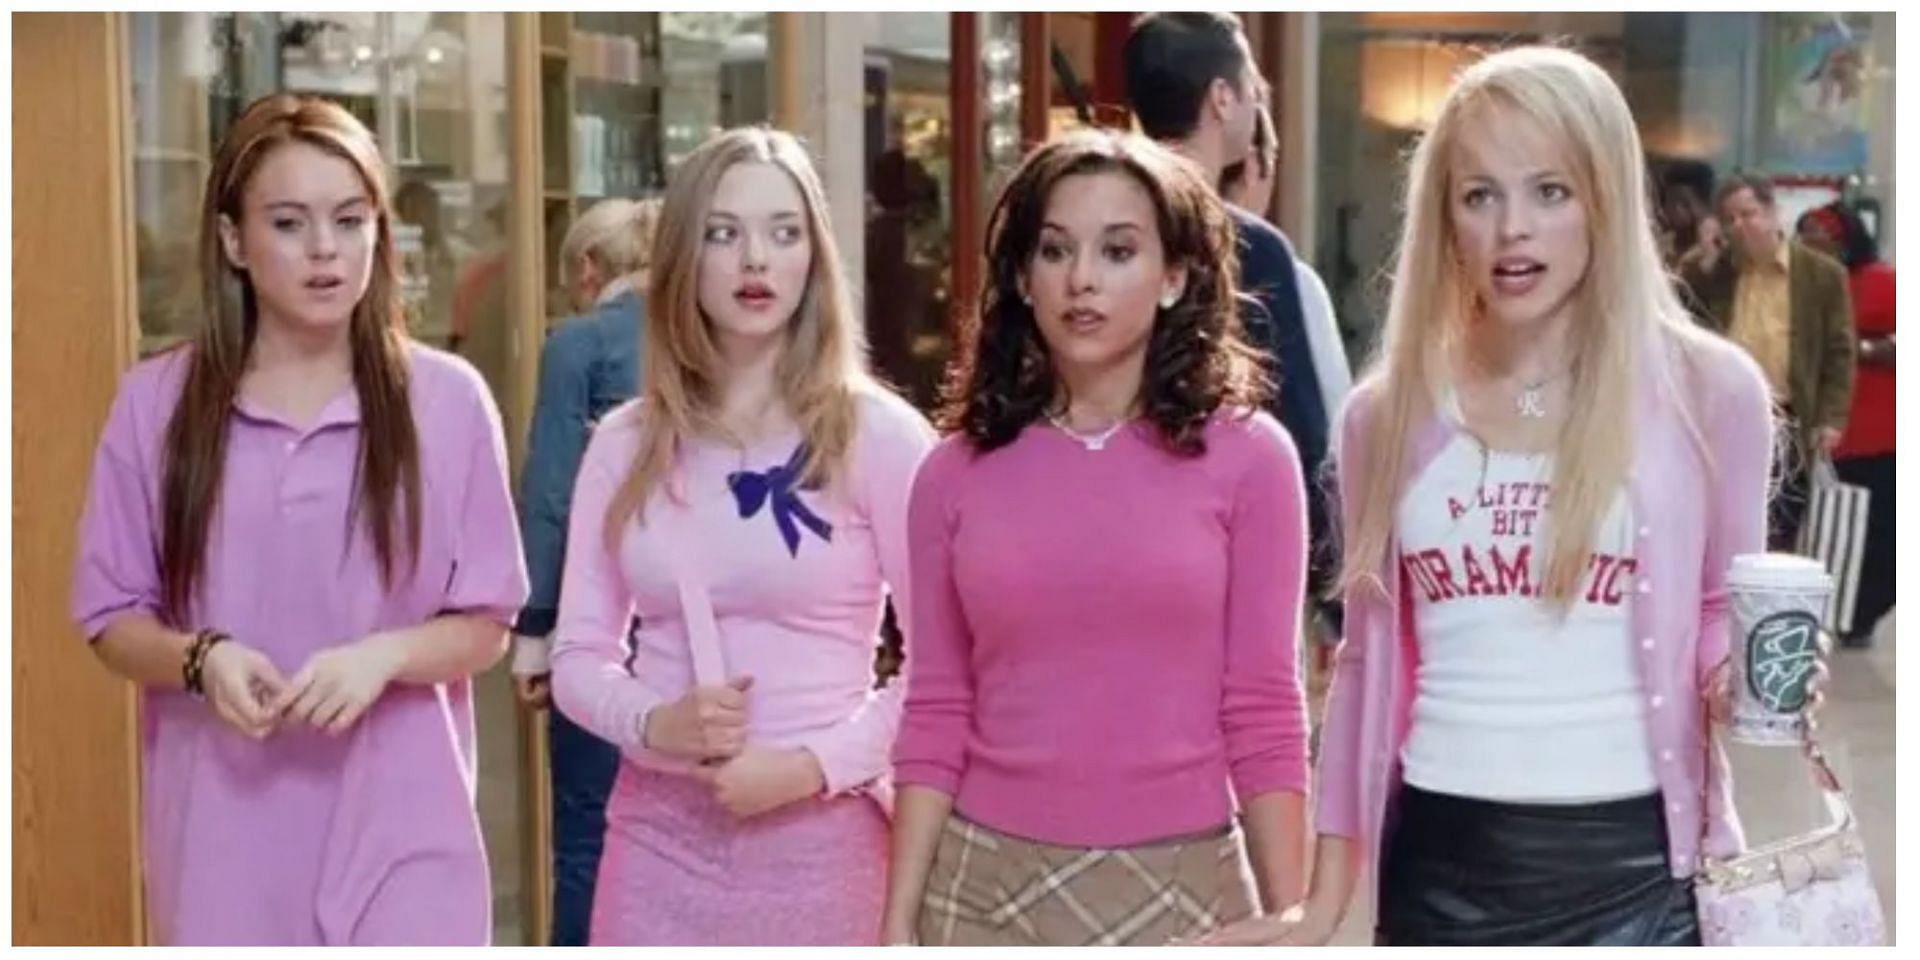 Why is October 3rd celebrated as the Mean Girls Day? Details explored.